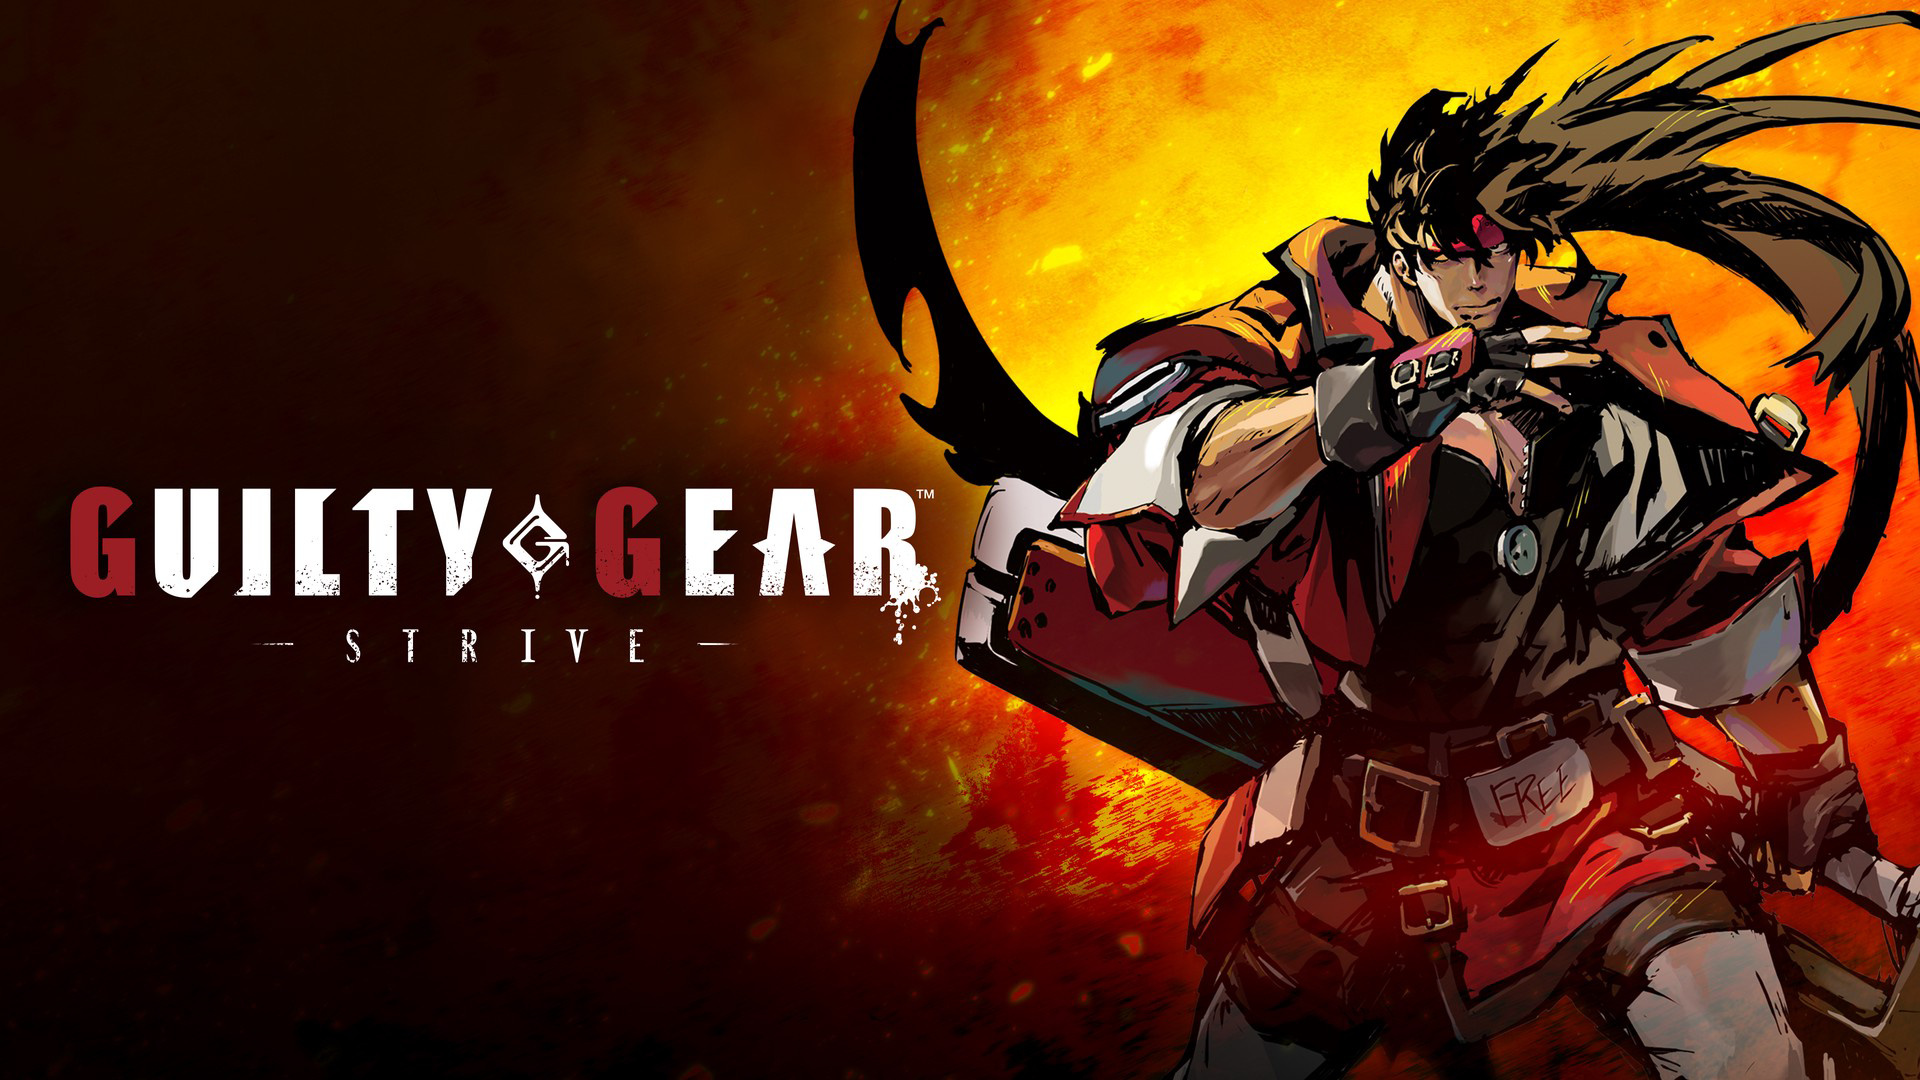 Guilty Gear, Ver. 121 patch notes, Exciting updates, Arc System Works excellence, 1920x1080 Full HD Desktop